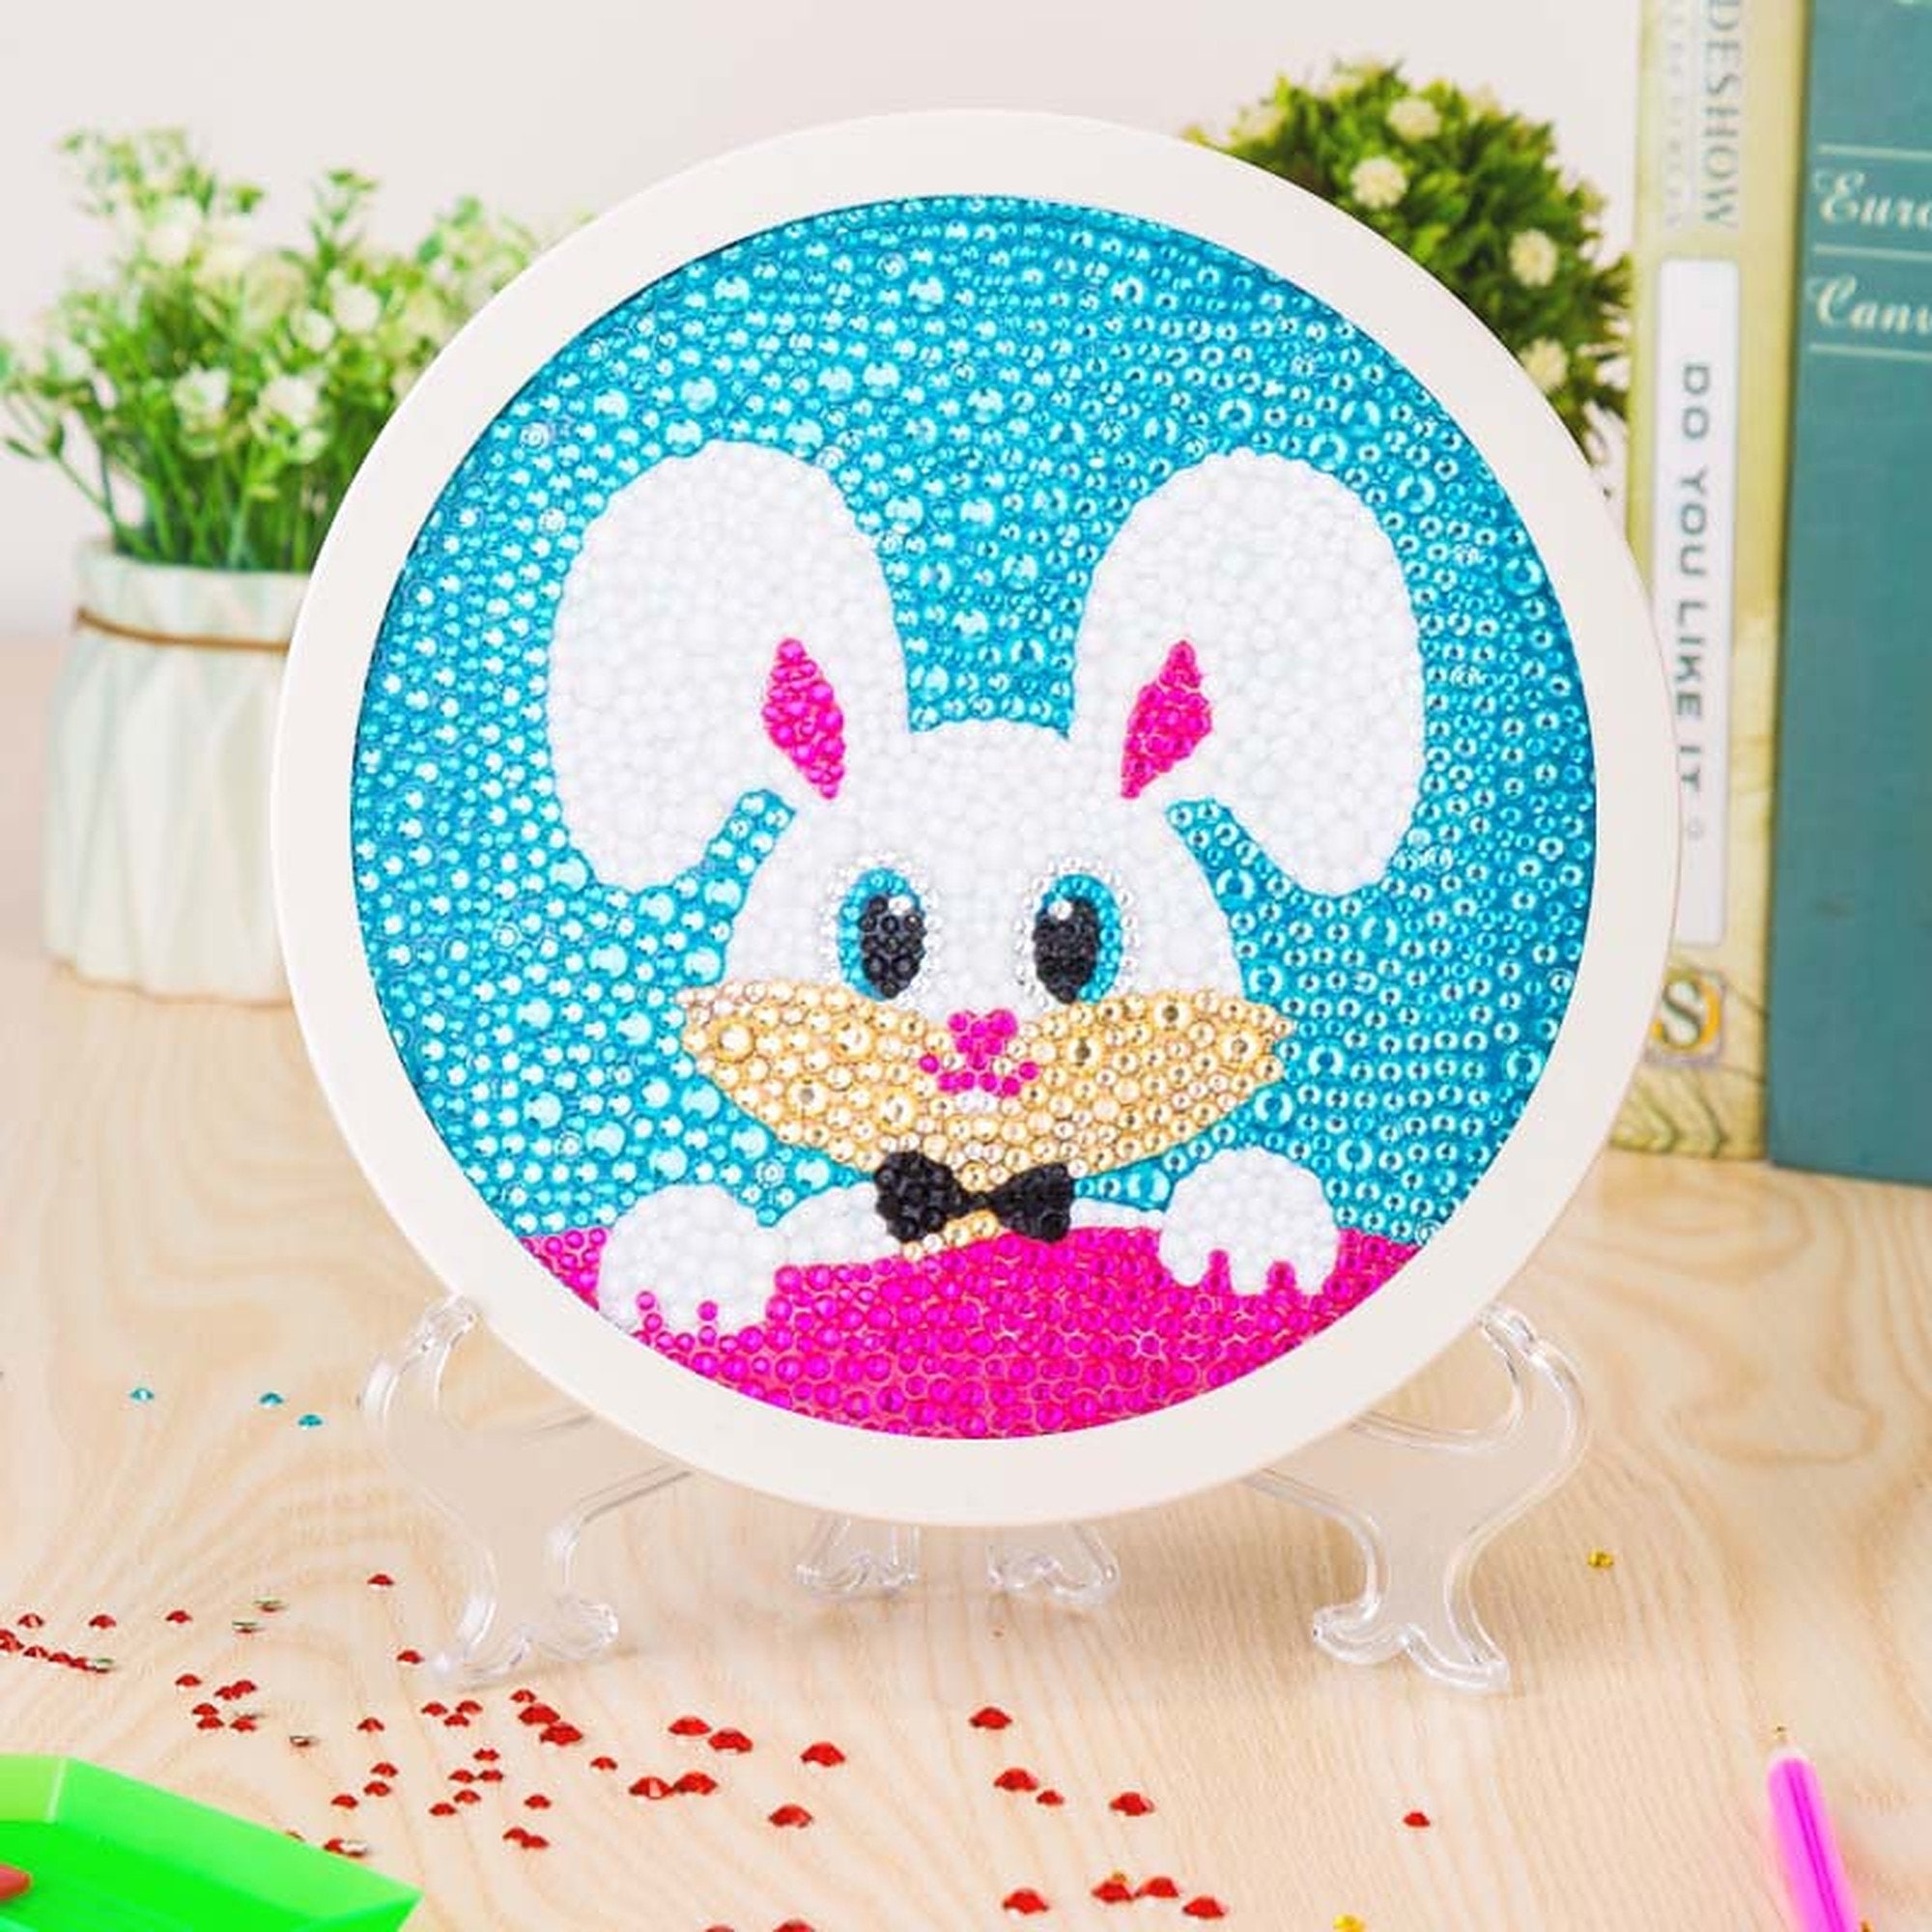  Diamond Painting Kits for Adults, 5D Diamond Painting Rabbit Diamond  Art Easter Bunny Full Drill Rhinestone Picture Art Craft for Home Wall  Decor (17.5''X24''/45X60CM, YOUZESM-A017)